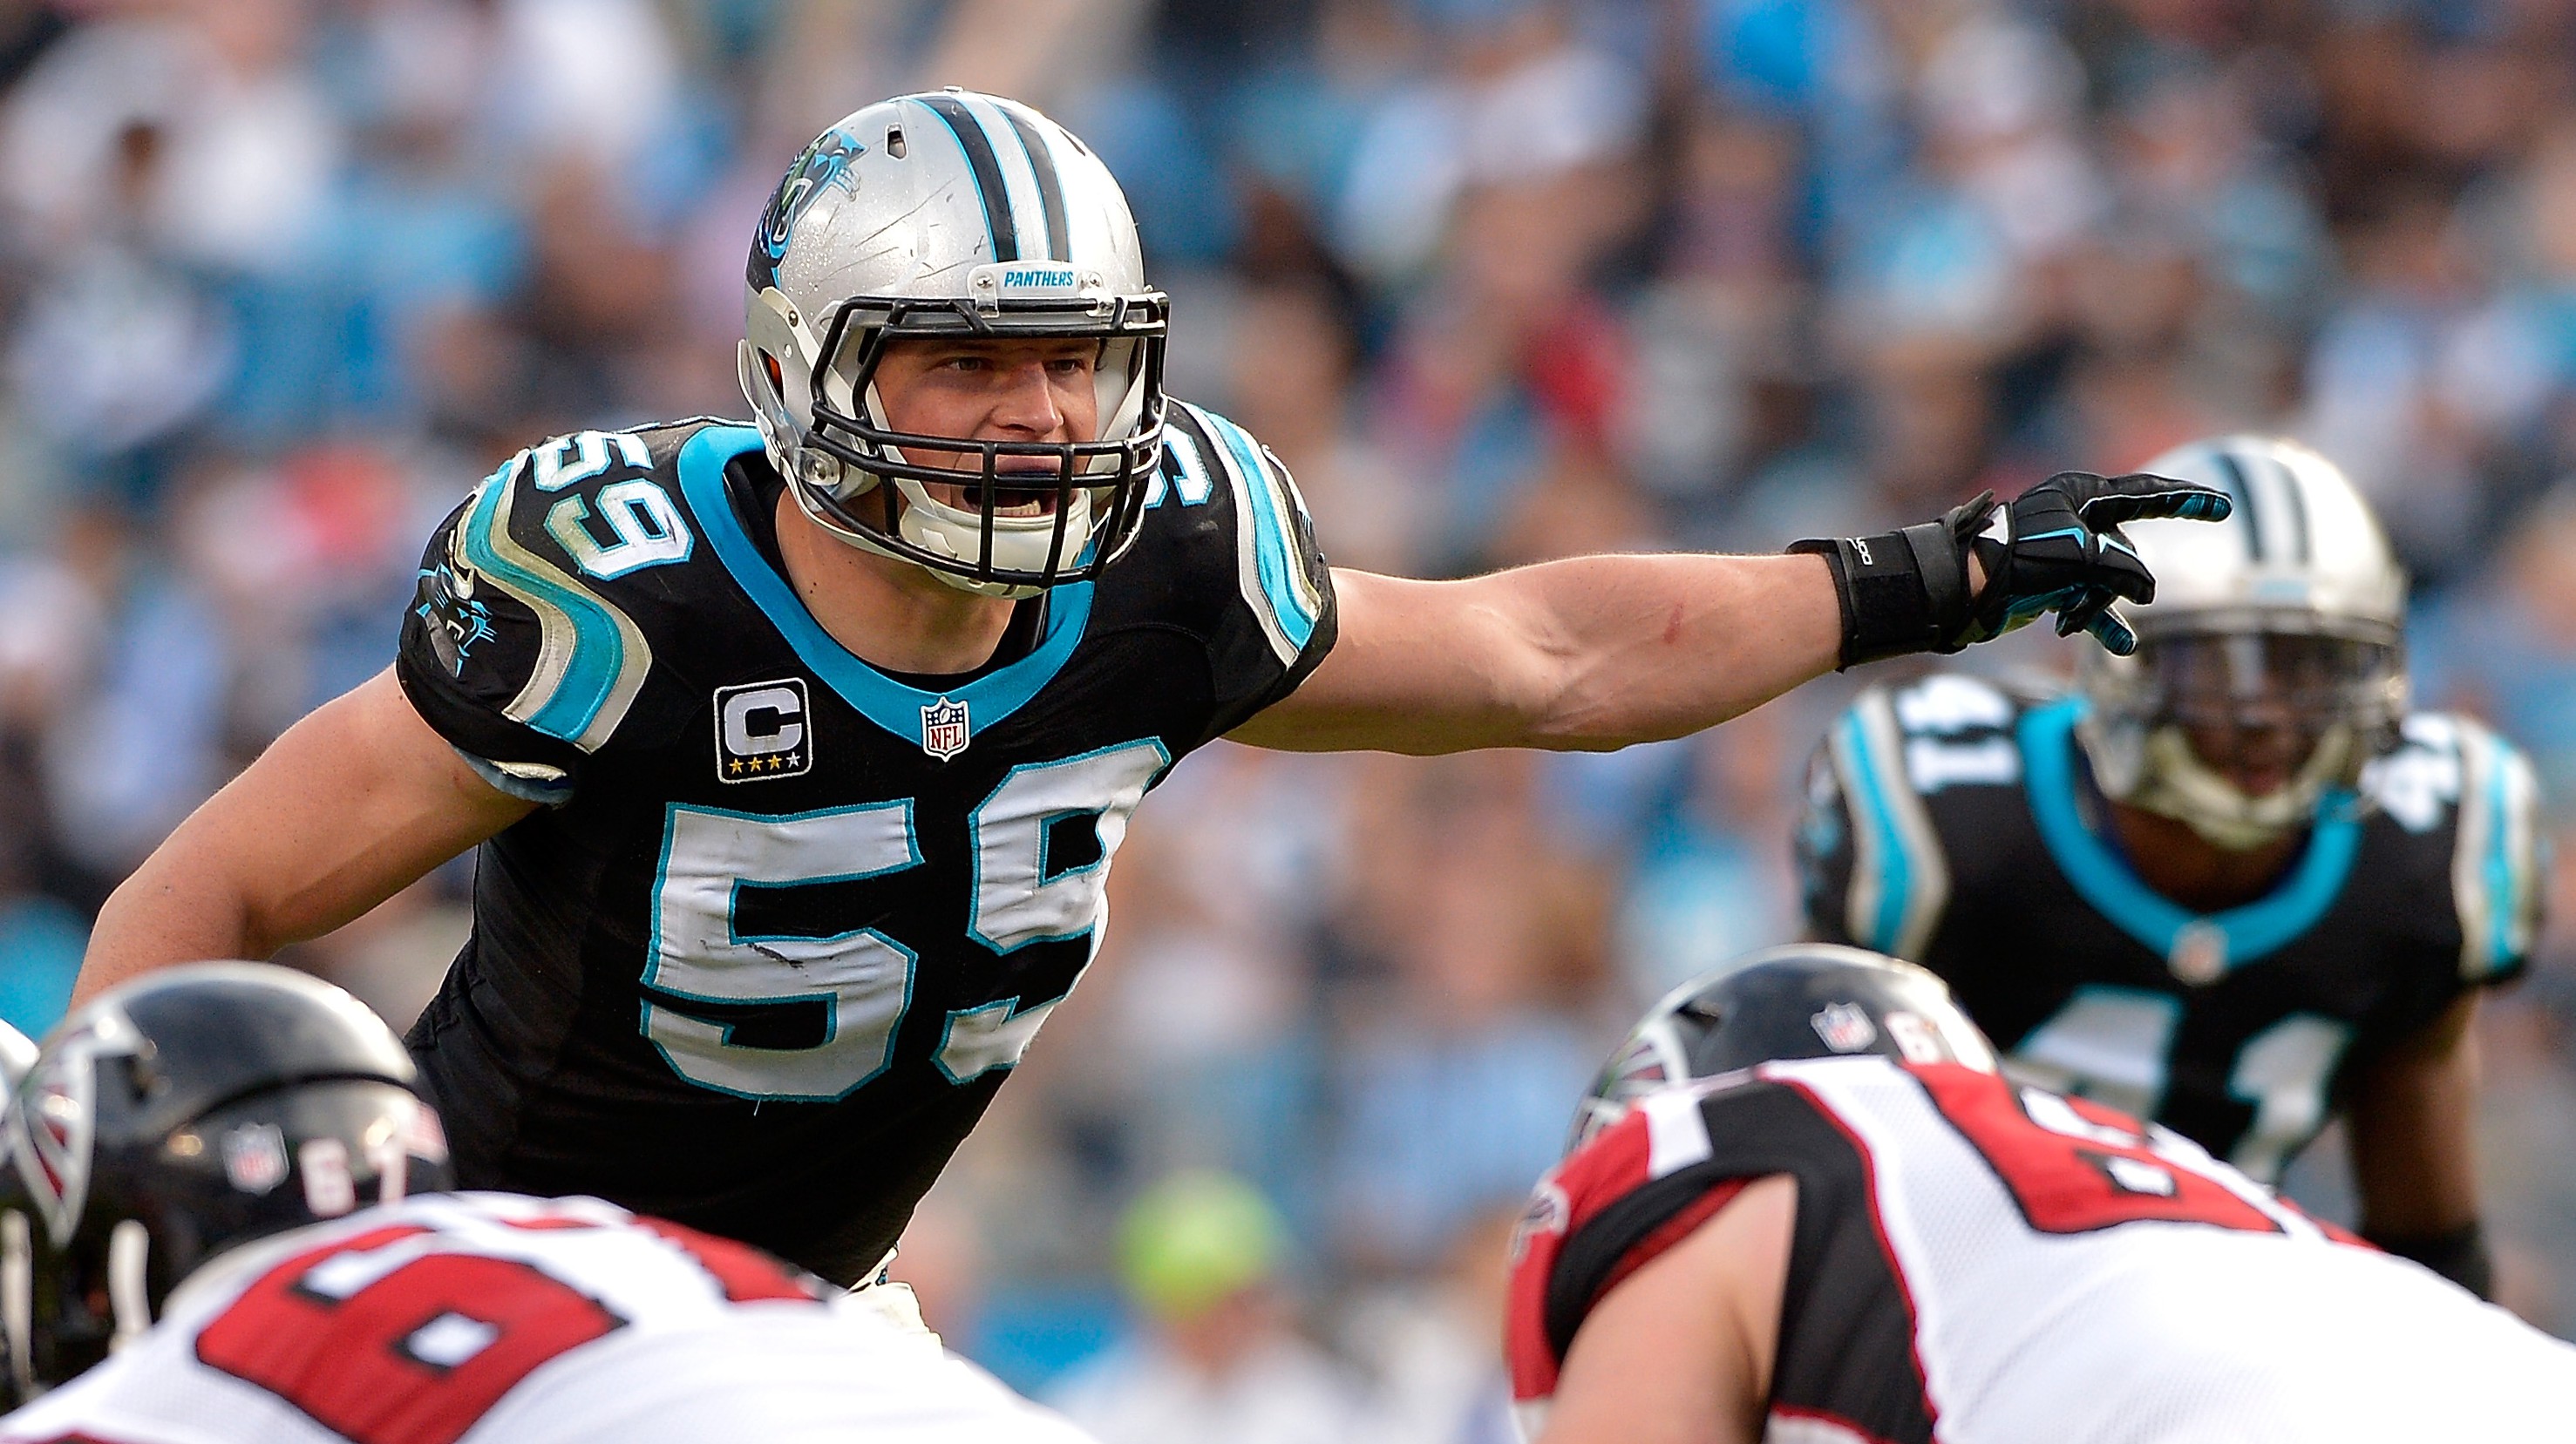 Luke Kuechly 5 Fast Facts You Need to Know